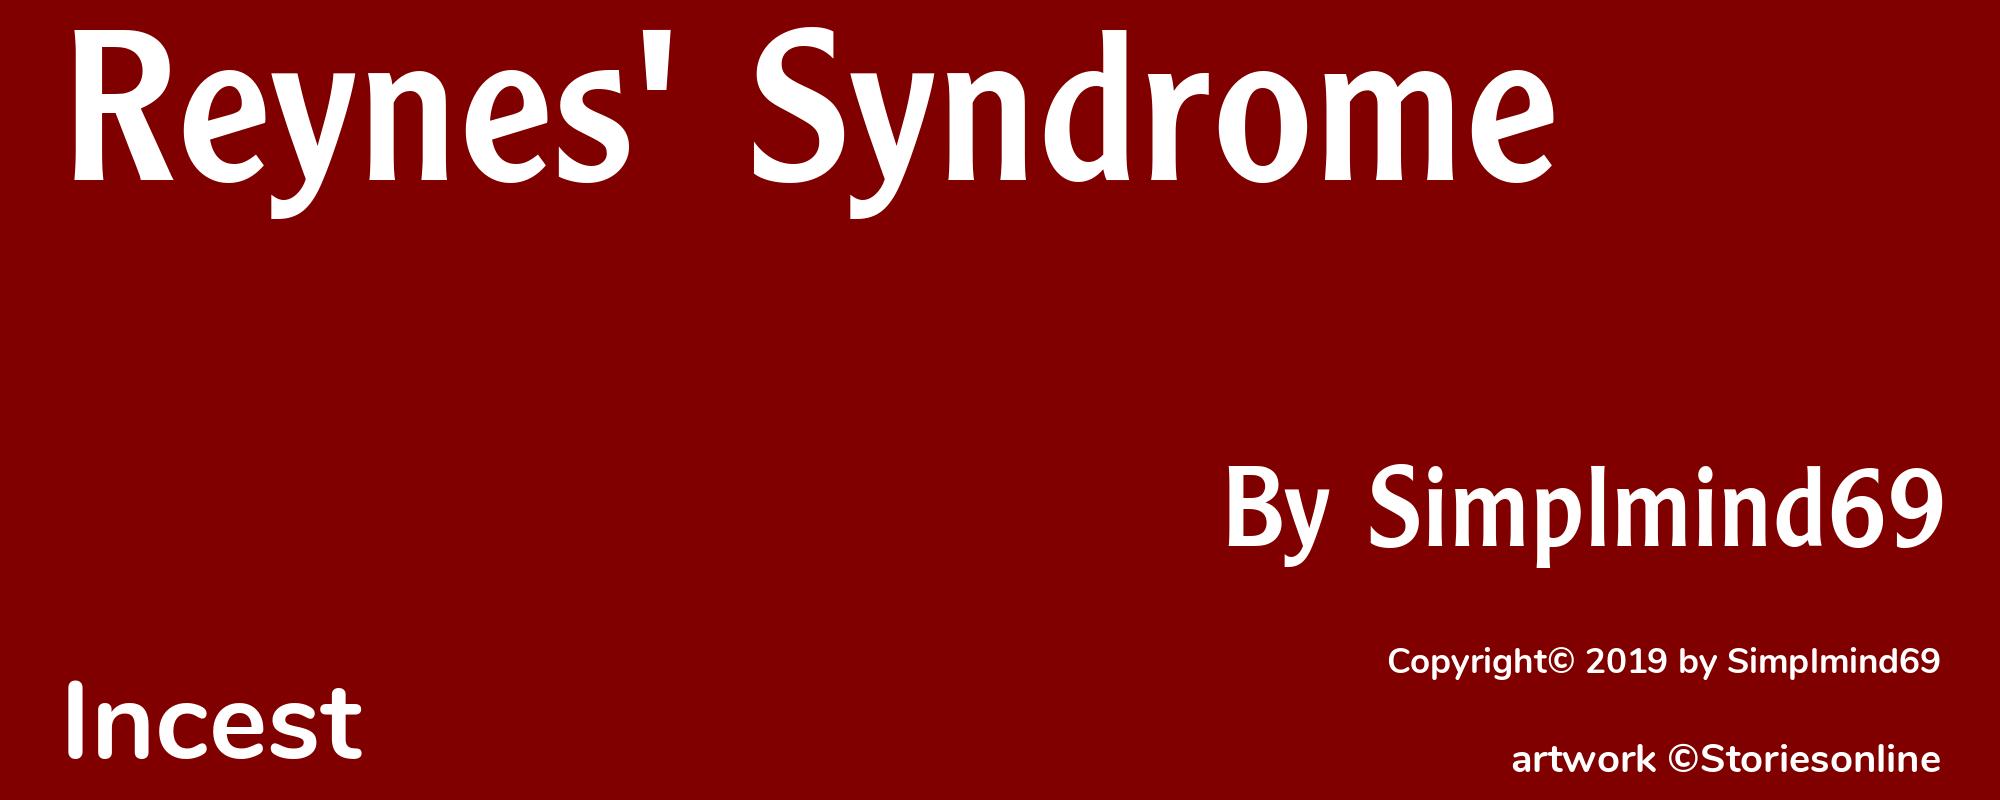 Reynes' Syndrome - Cover